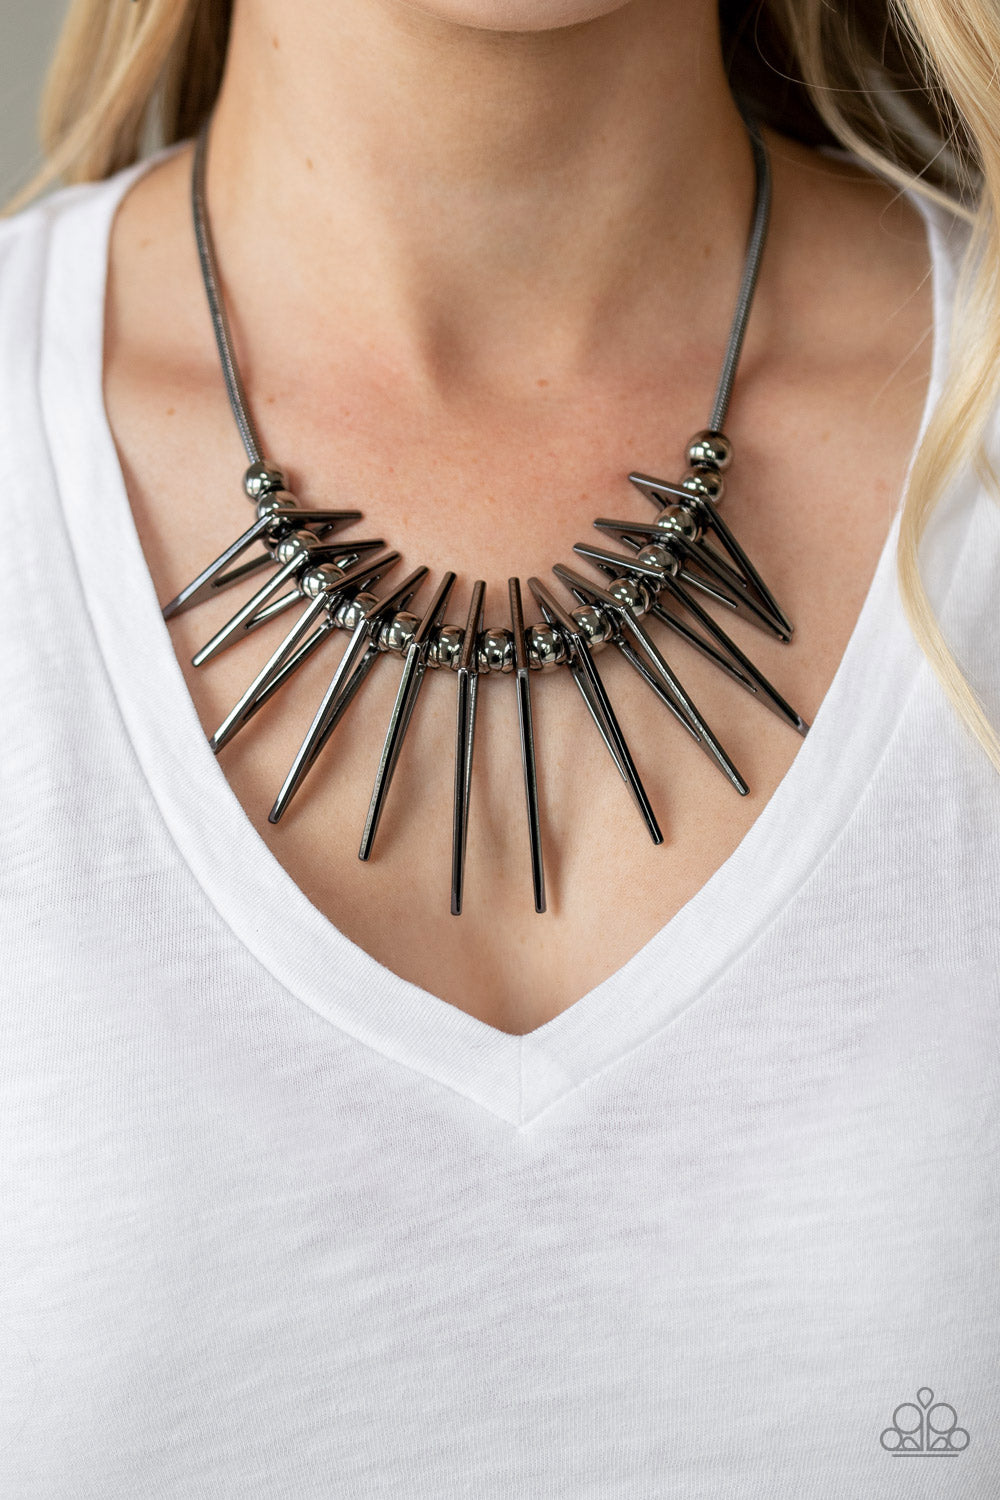 Fully Charged Necklace - Black